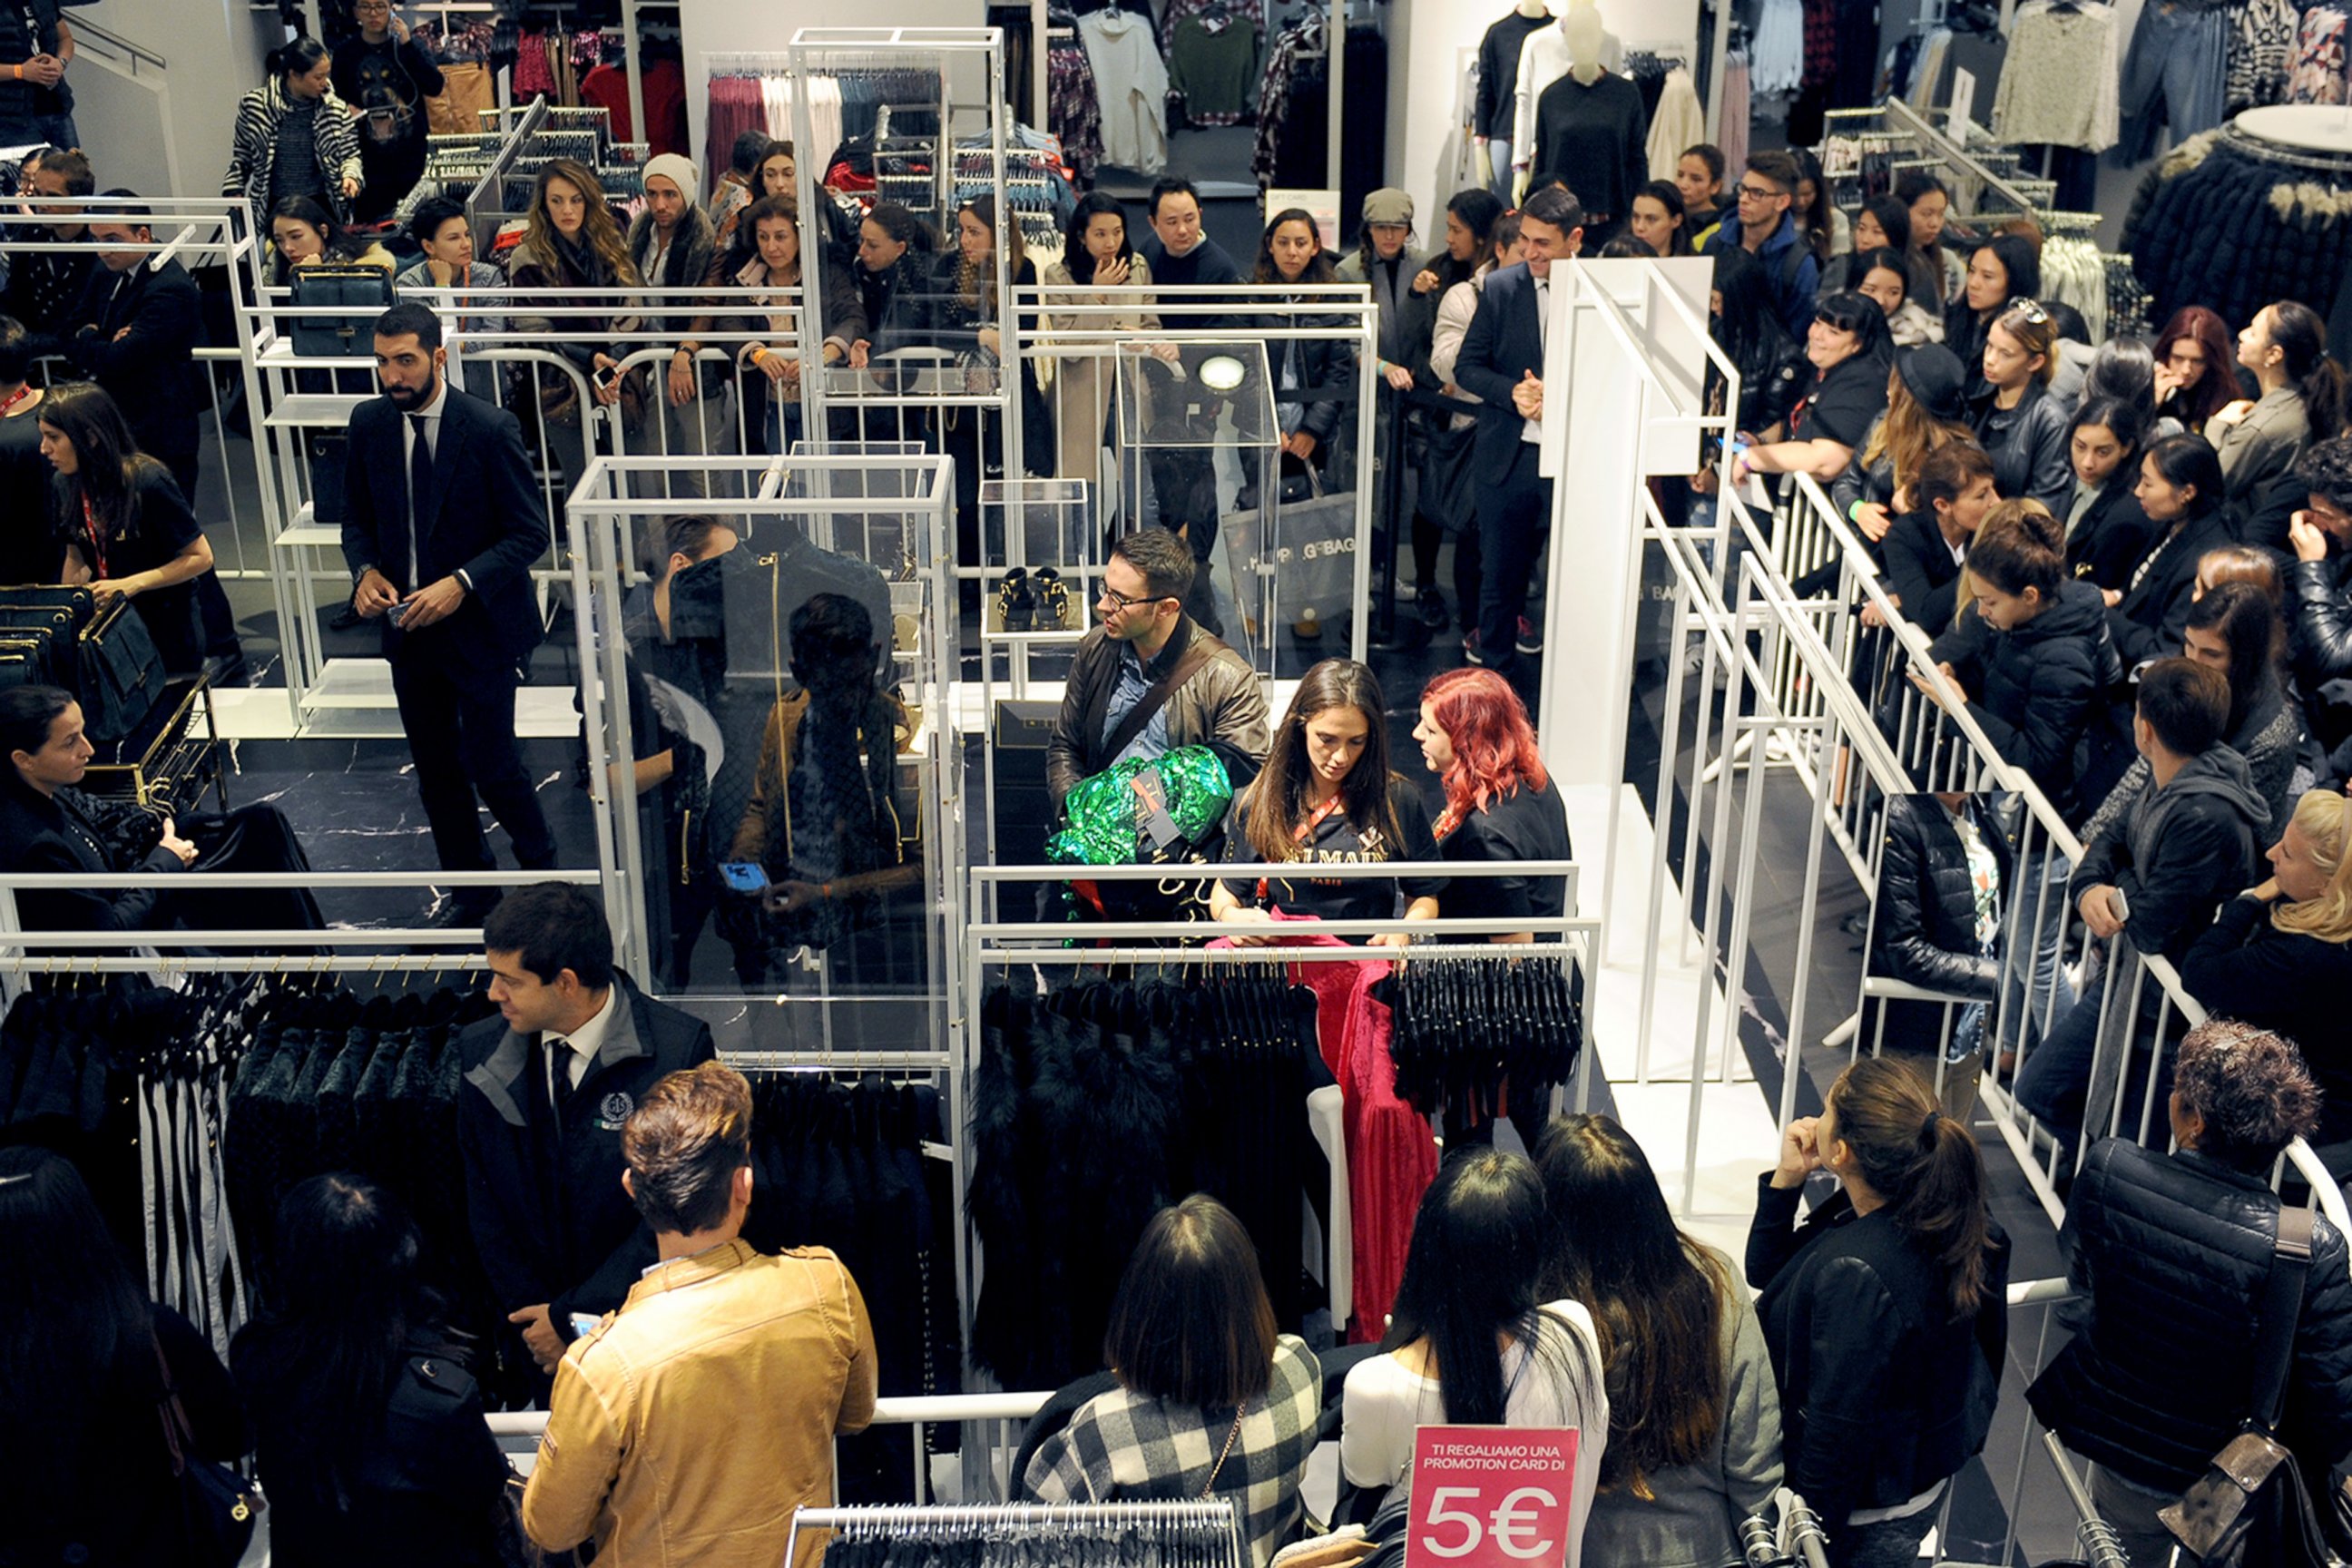 PHOTO: People browse for clothing inside H&M during the Balmain For H&M Collection Launch near Piazza della Signoria, Nov. 5, 2015, in Florence, Italy.